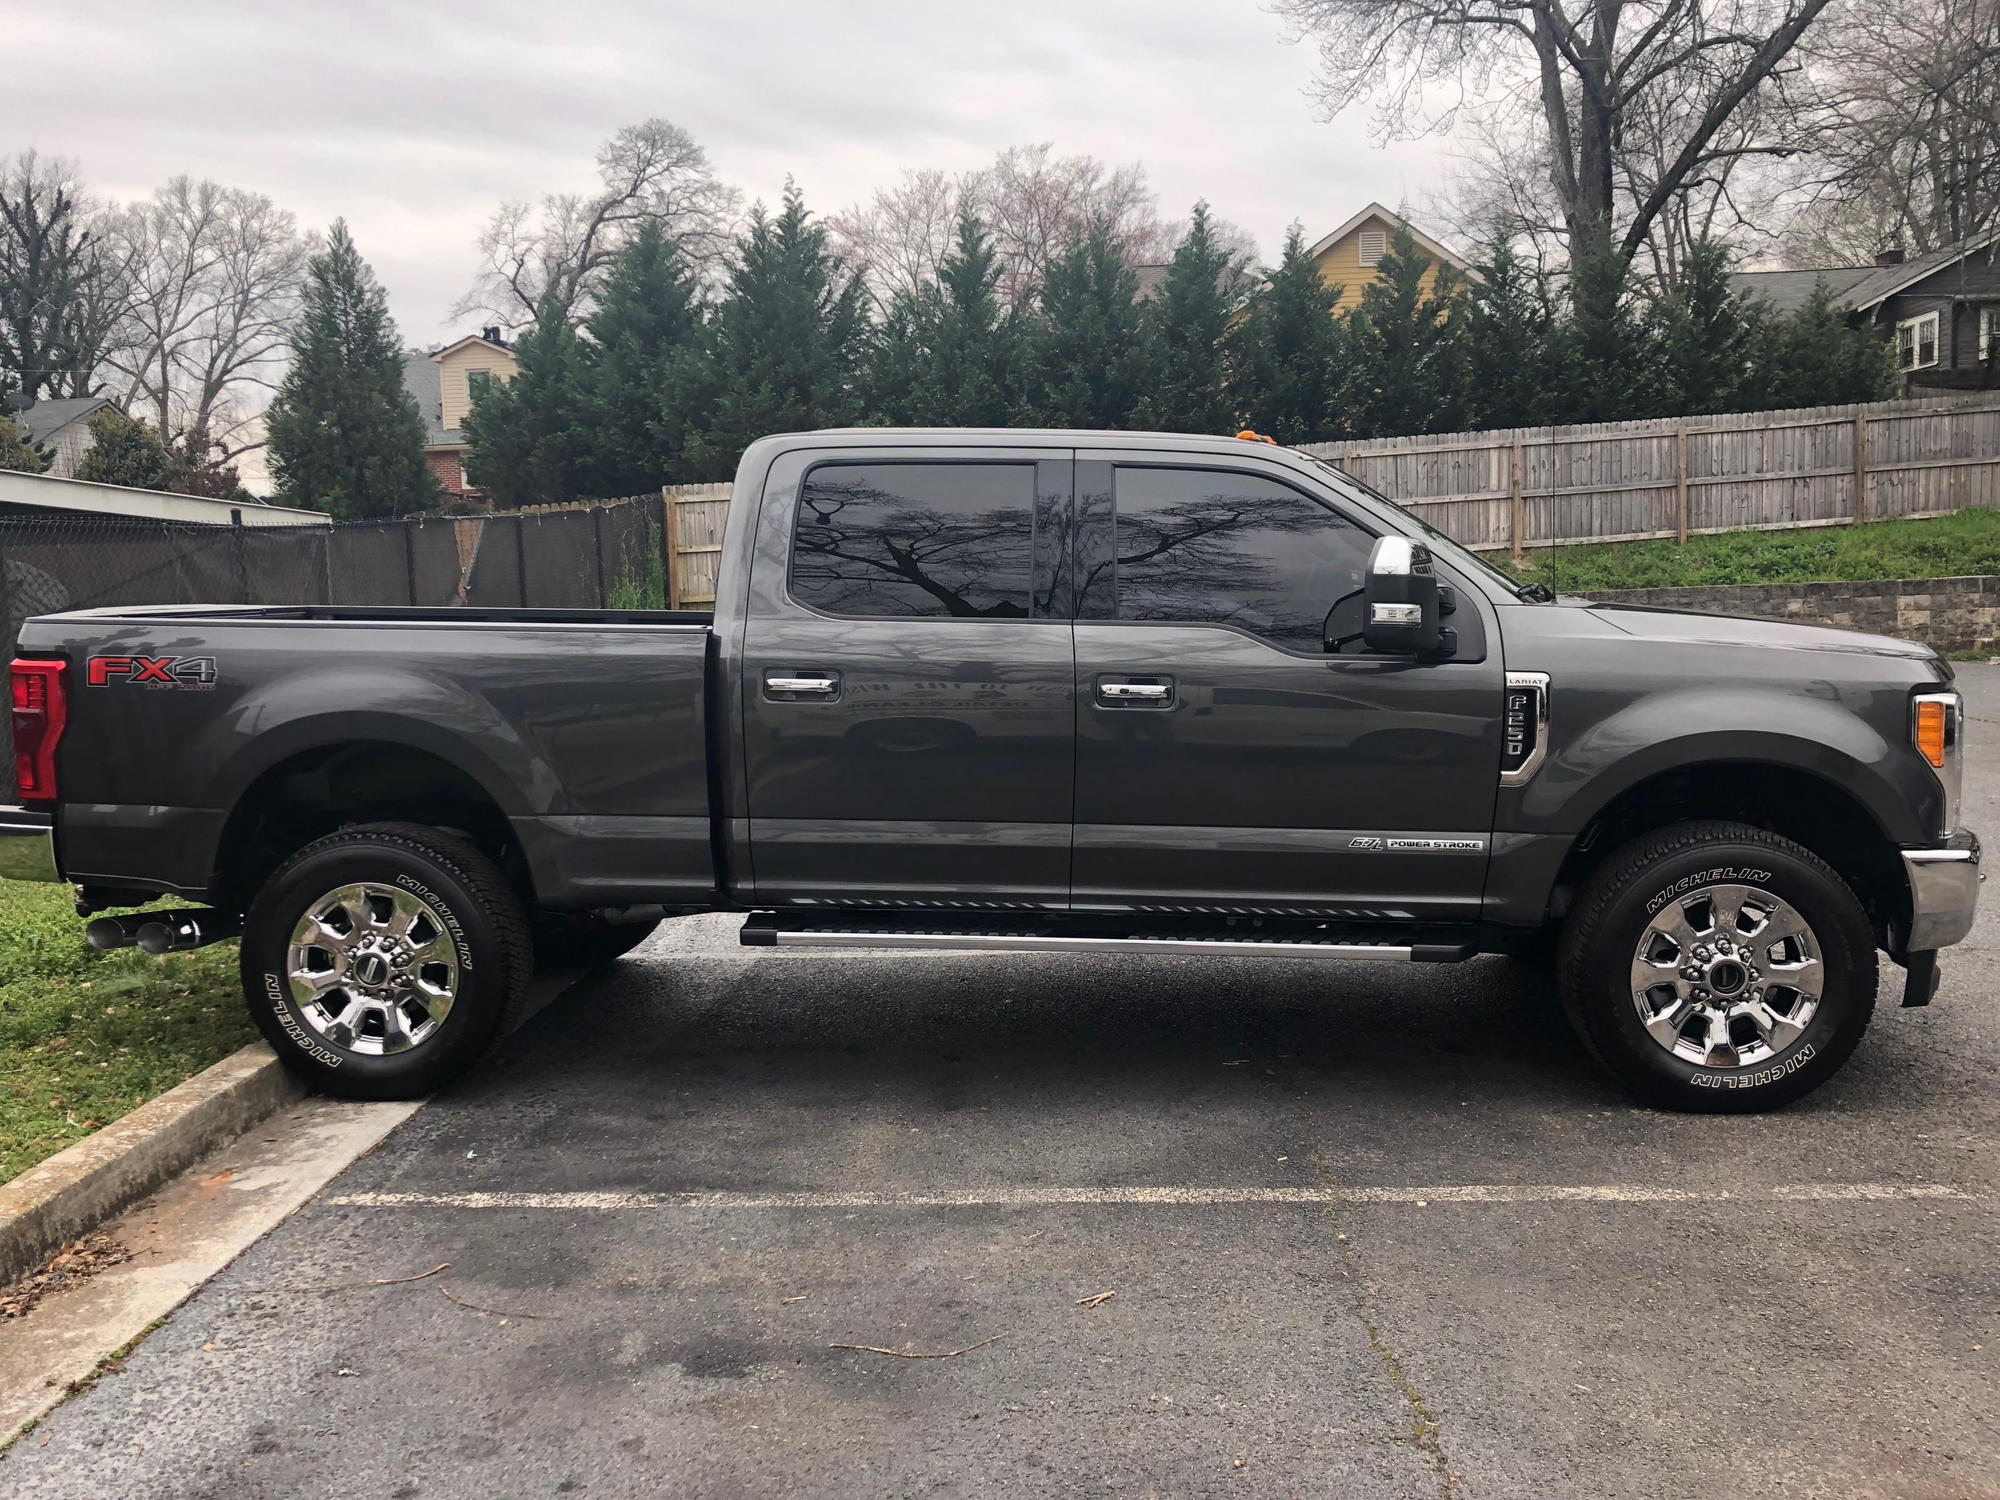 Wheels and Tires/Axles - TRADE oem 20" wheels (17-19). - Used - 2017 to 2019 Ford F-250 Super Duty - Cartersville, GA 30120, United States